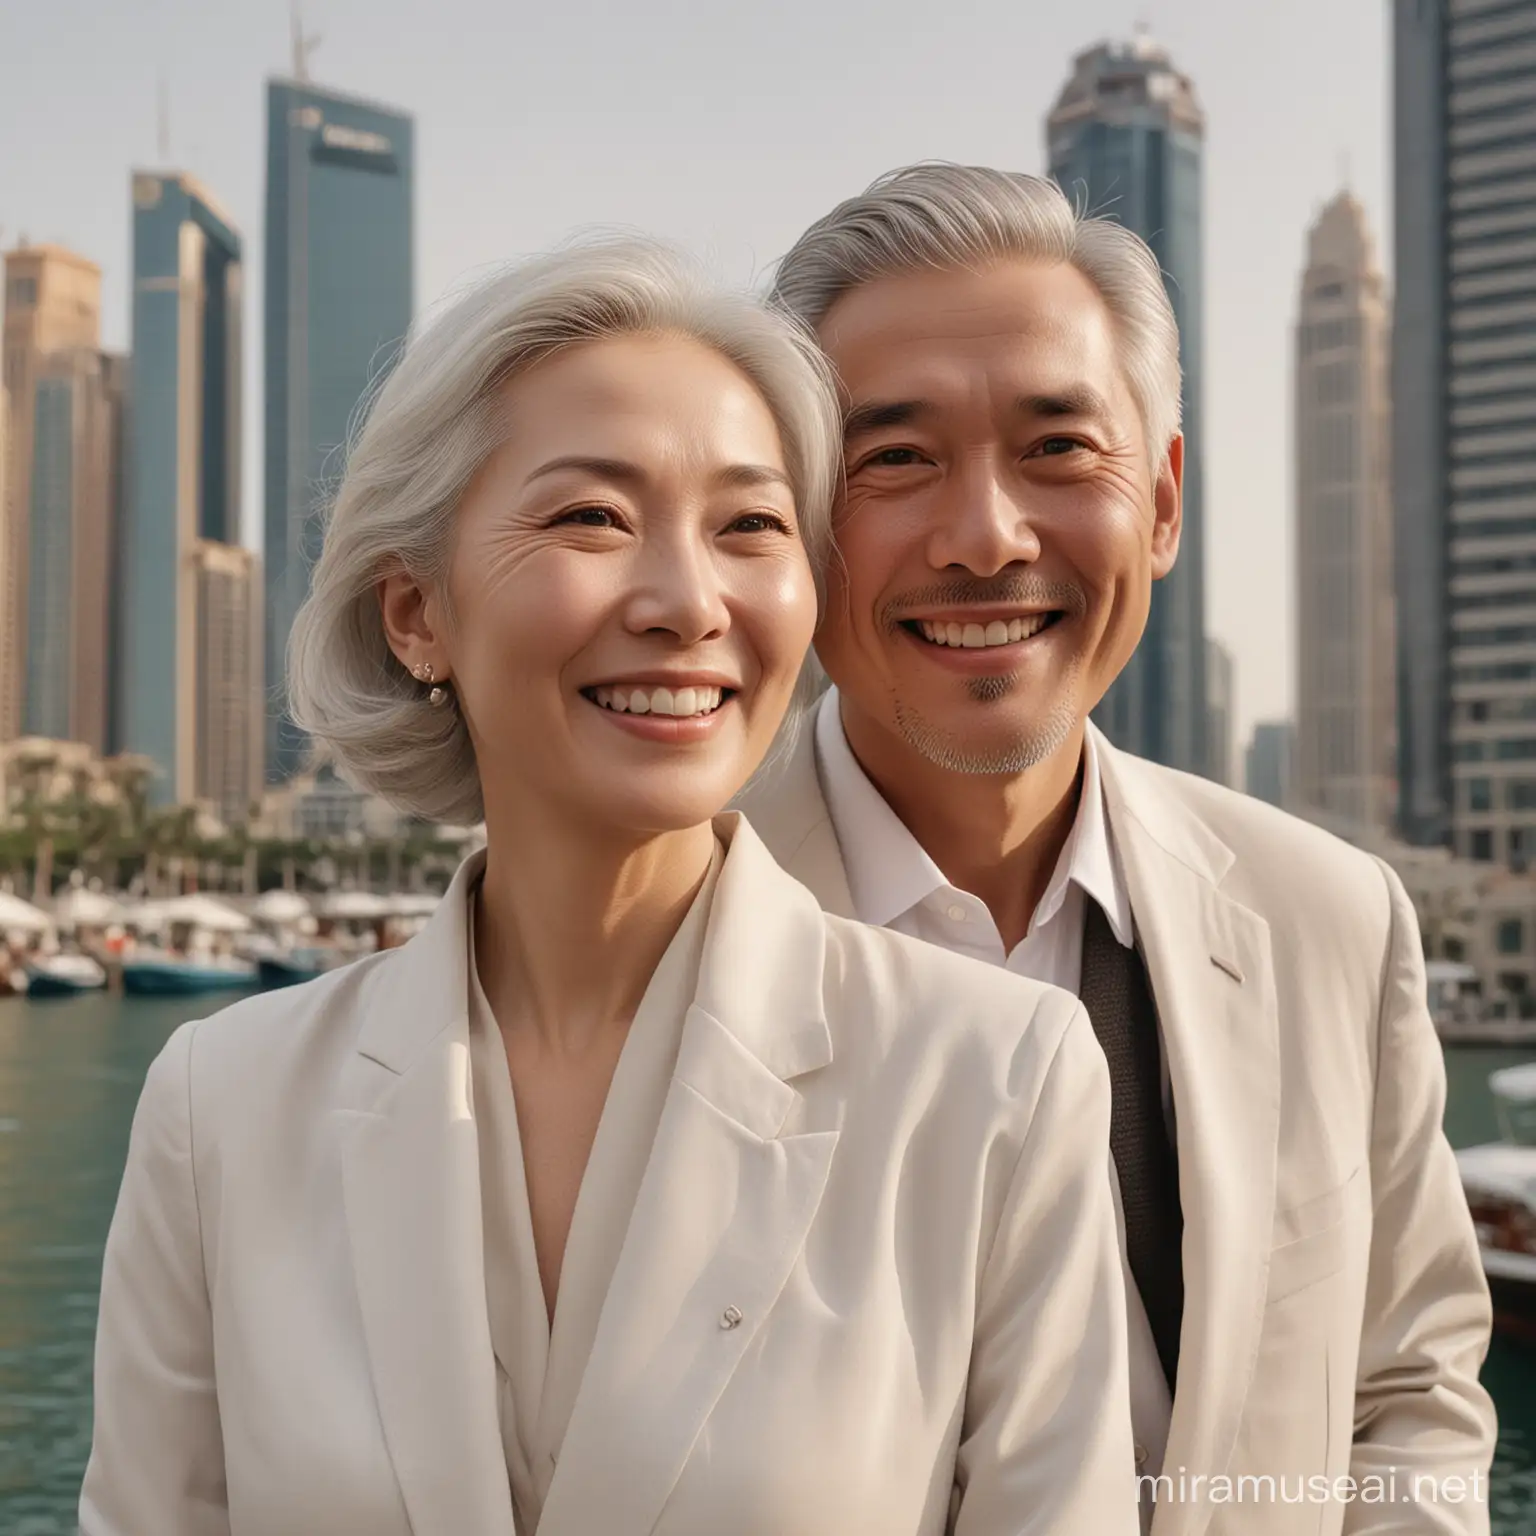 8K photorealistic Image of a couple of Chinese retirees, a man and a woman, with white faces, wearing light clothes. They have a slender faces with high cheekbones. Their smiling eyes are large and expressive, with dark irises, framed by neatly shaped eyebrows. The woman and the man are wearing a light-colored, probably white, button-up shirt underneath a tailored gray blazer. The blazer is well-fitted, accentuating shoulders and waist. They wear minimal jewelry. The lighting in the image is soft and diffused, creating a gentle glow on their faces and a subtle interplay of light and shadow that gives their skin a luminous quality. Background is Dubai Marina, providing a contrast that highlights silhouette. Their pose is relaxed yet confident, and their torso turned towards the camera. Their expression is serene and approachable, with a hint of a smile on  lips.